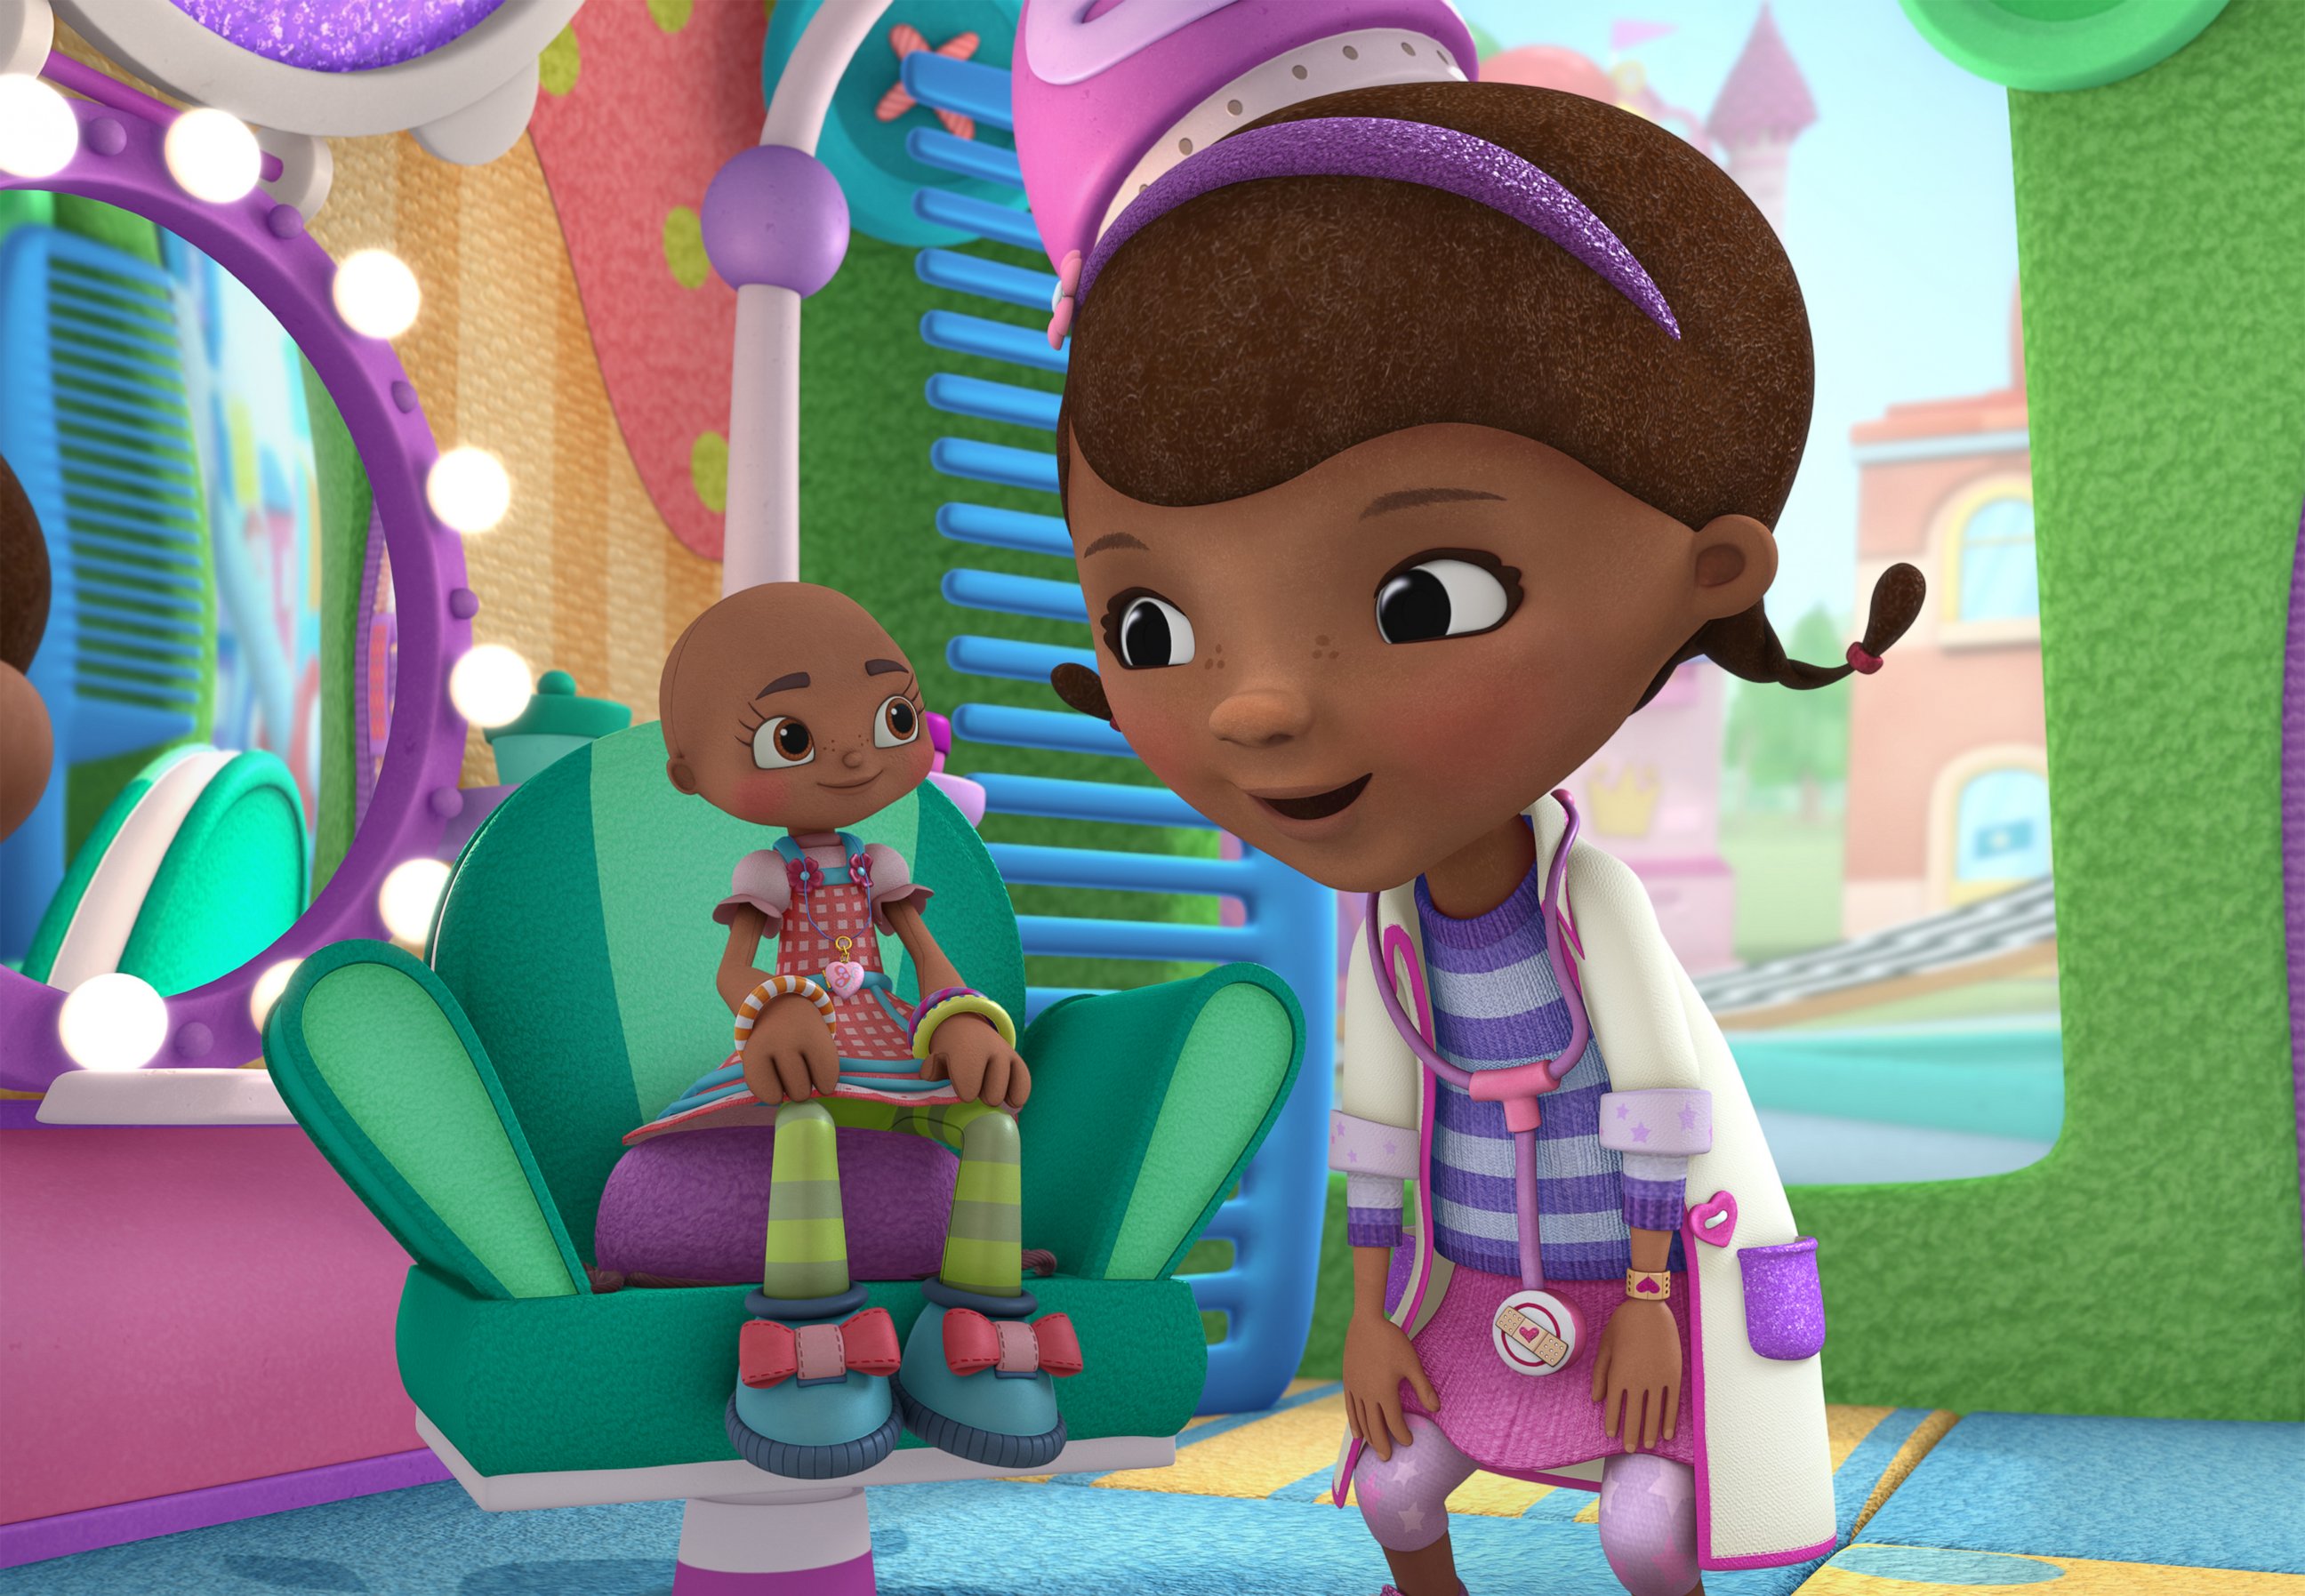 PHOTO: The special episode of Disney Junior's "Doc McStuffins" will air on June 4, National Cancer Survivors Day.